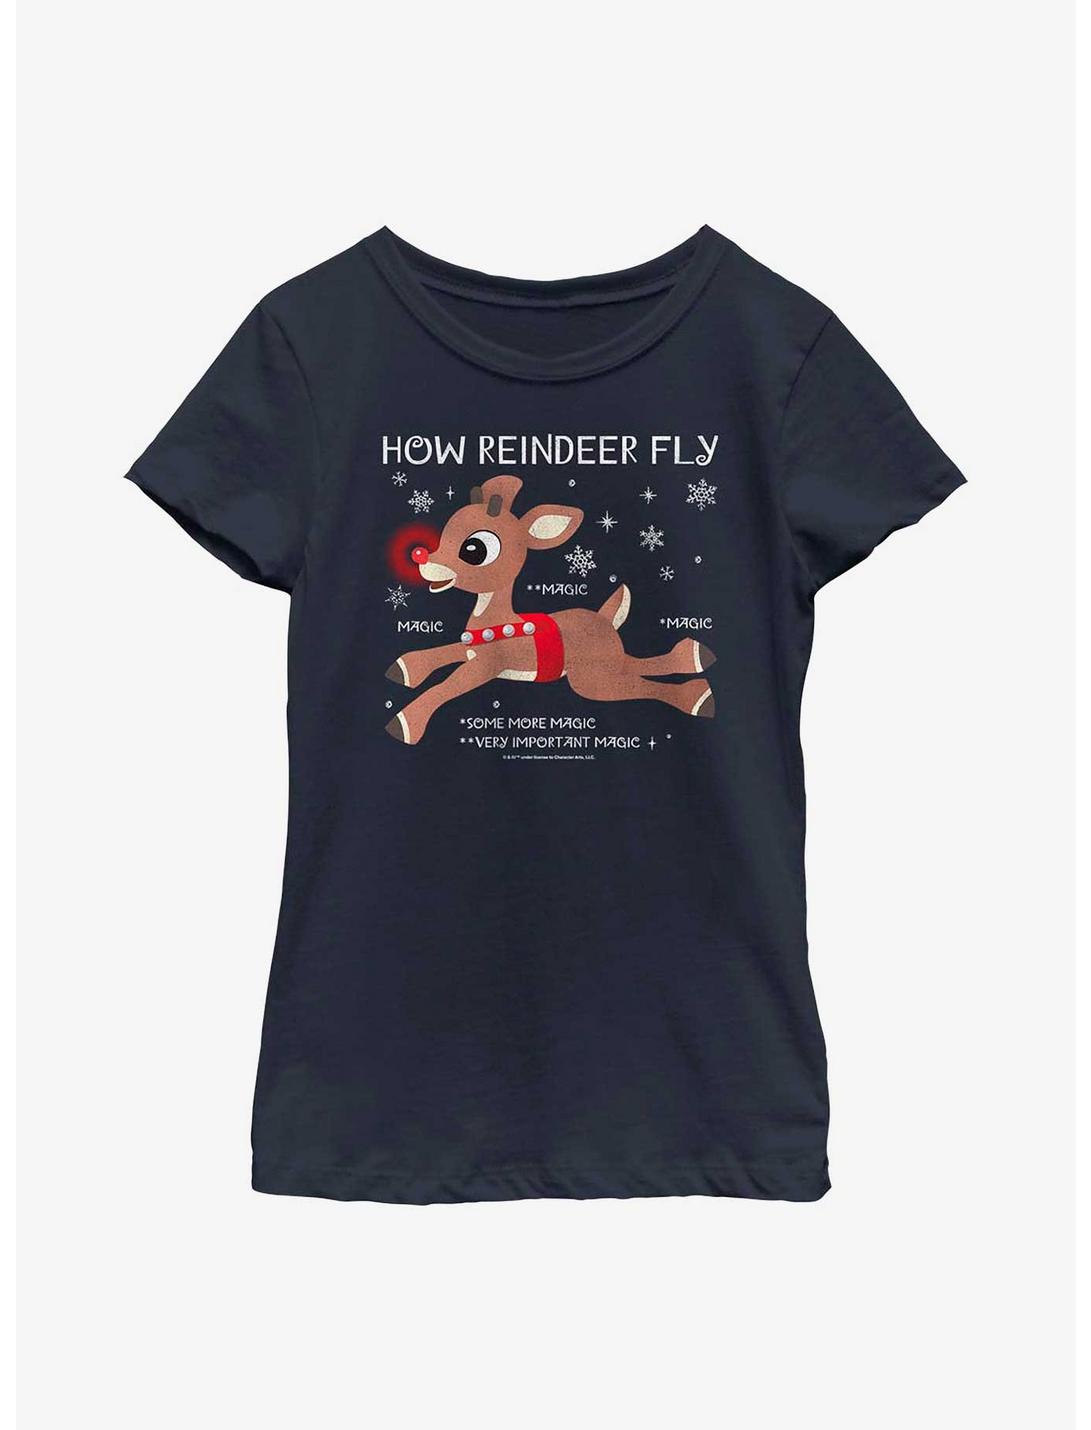 Rudolph The Red-Nosed Reindeer How To Fly Youth Girls T-Shirt, NAVY, hi-res